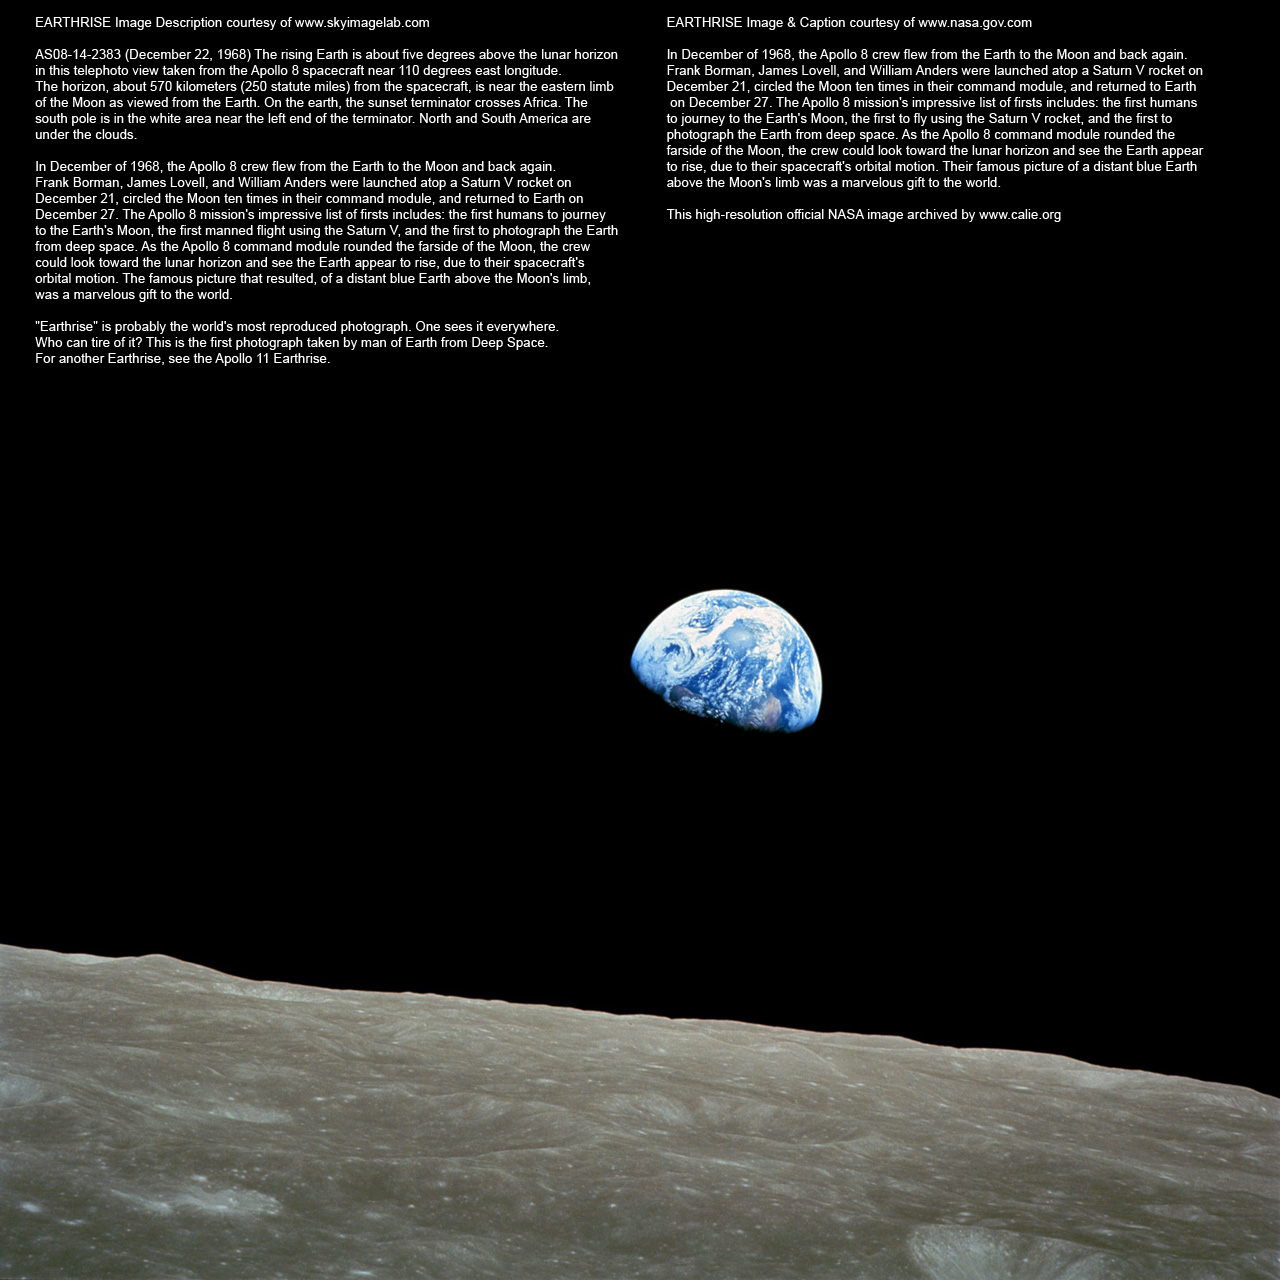 FAMOUS EARTHRISE HIGH RESOLUTION NASA Pictures Loading...